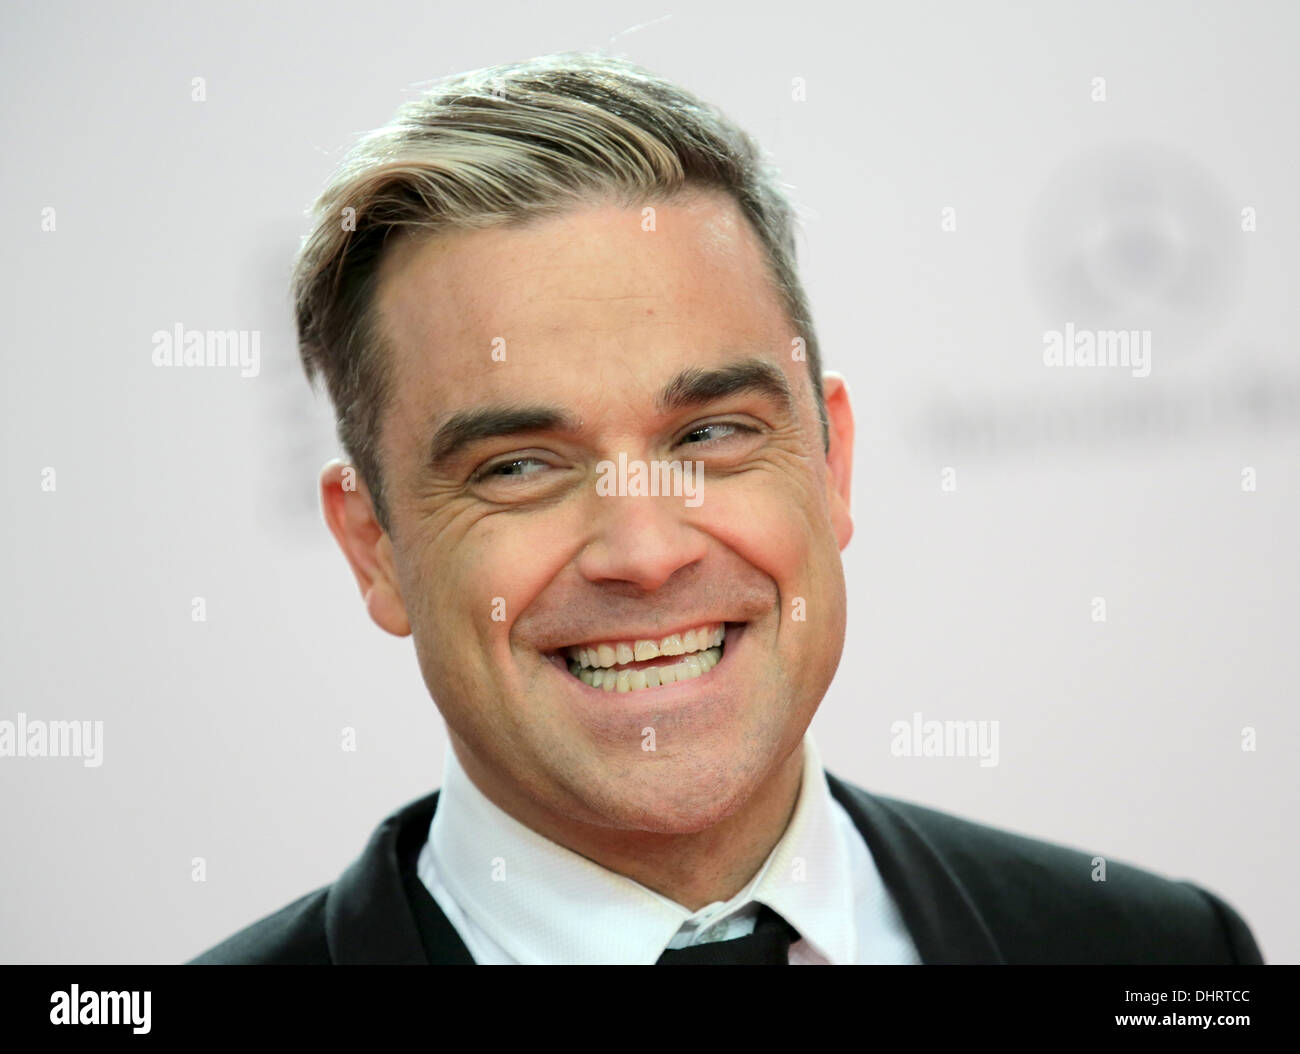 Berlin, Germany. 14th Nov, 2013. British singer Robbie Williams arrives for the 65th Bambi award ceremony at the Stage Theater in Berlin, Germany, 14 November 2013. The Burda media prize will be awarded in 17 categories at the Stage Theater in Berlin on 14 November 2013. Photo: Michael Kappeler/dpa/Alamy Live News Stock Photo